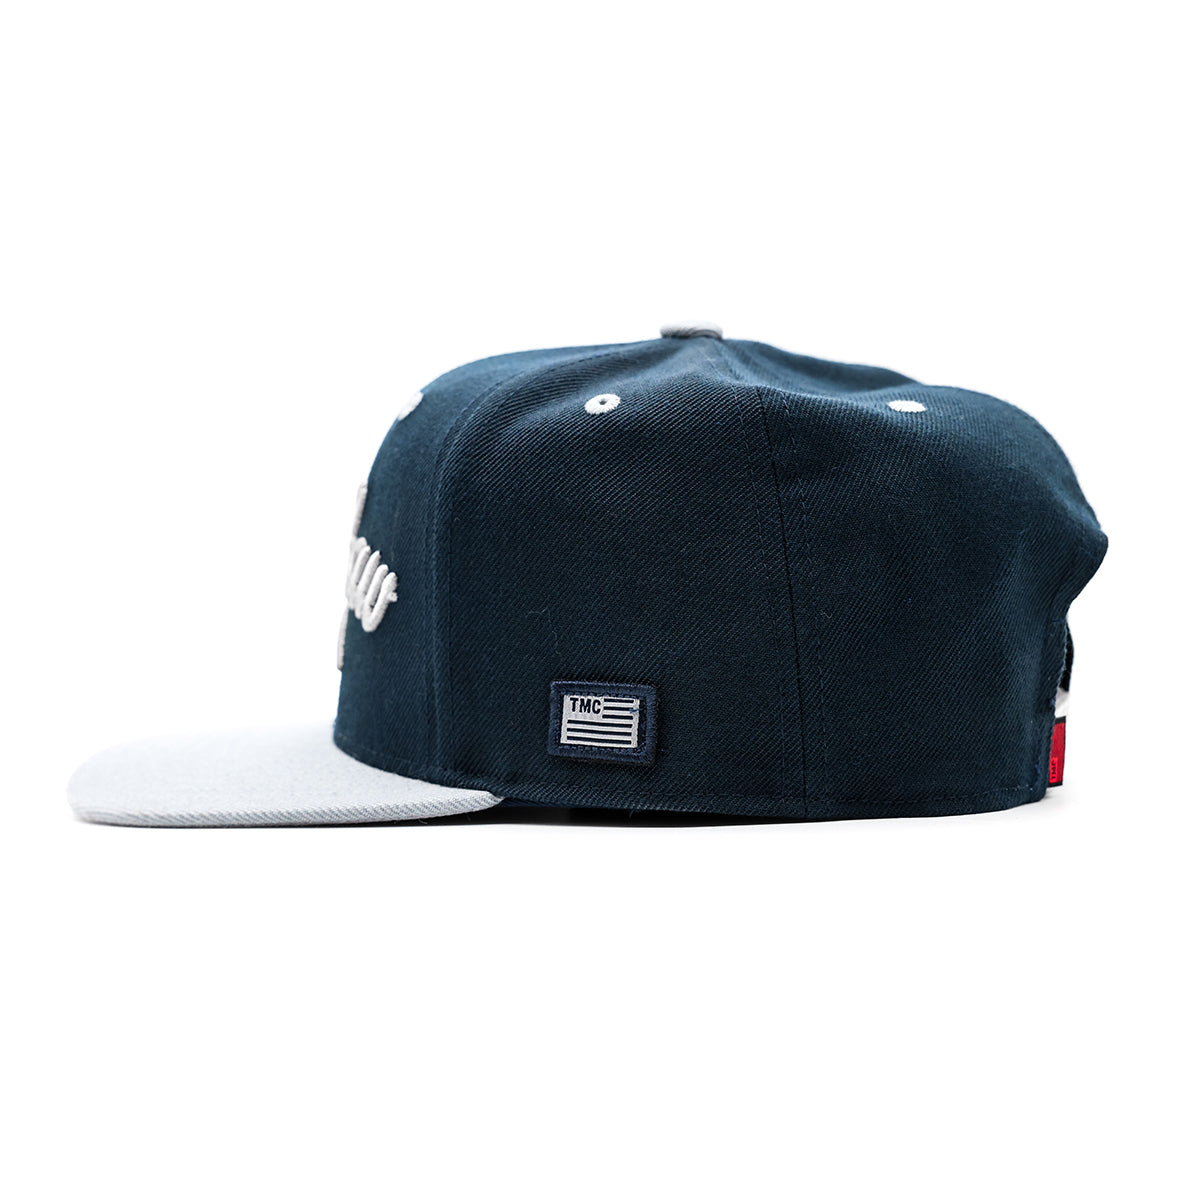 Crenshaw Limited Edition Snapback - Navy/Gray [Two-Tone] - Side